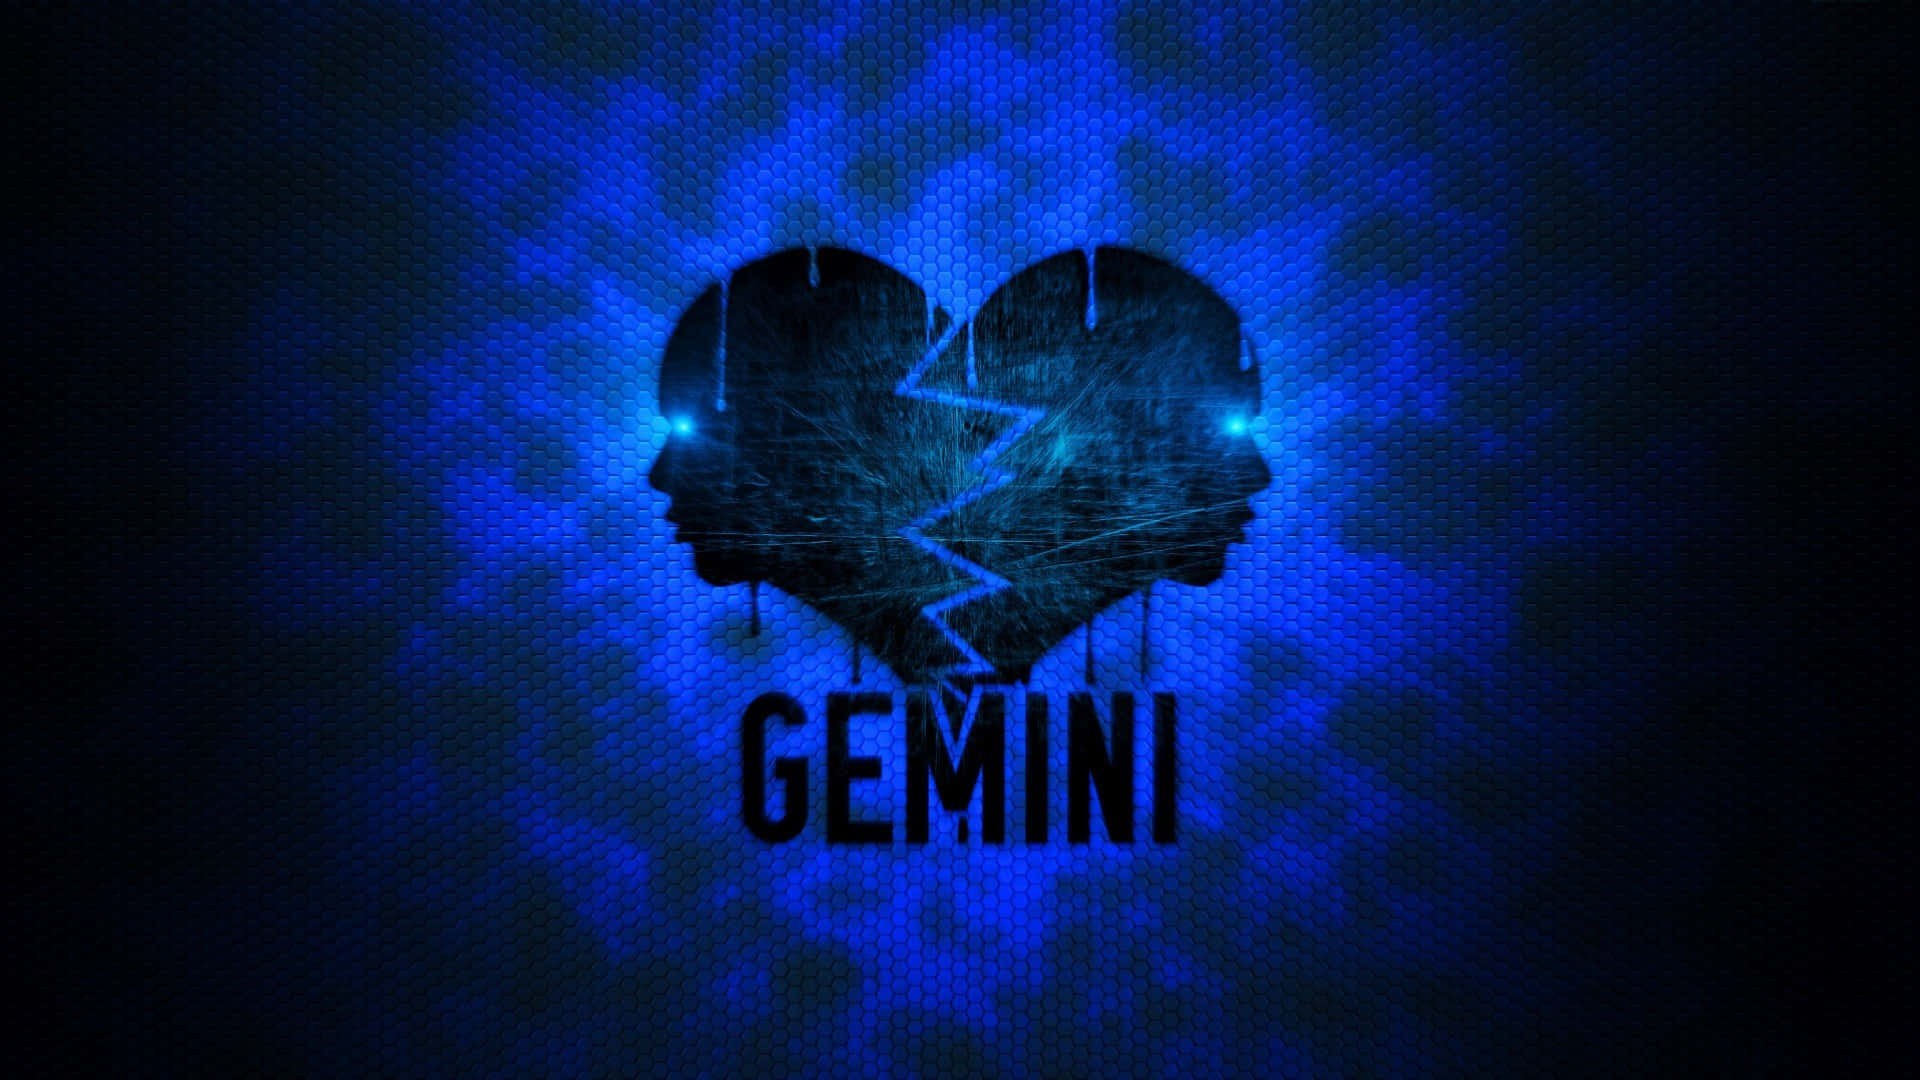 “Live Life’s Duality with Gemini”